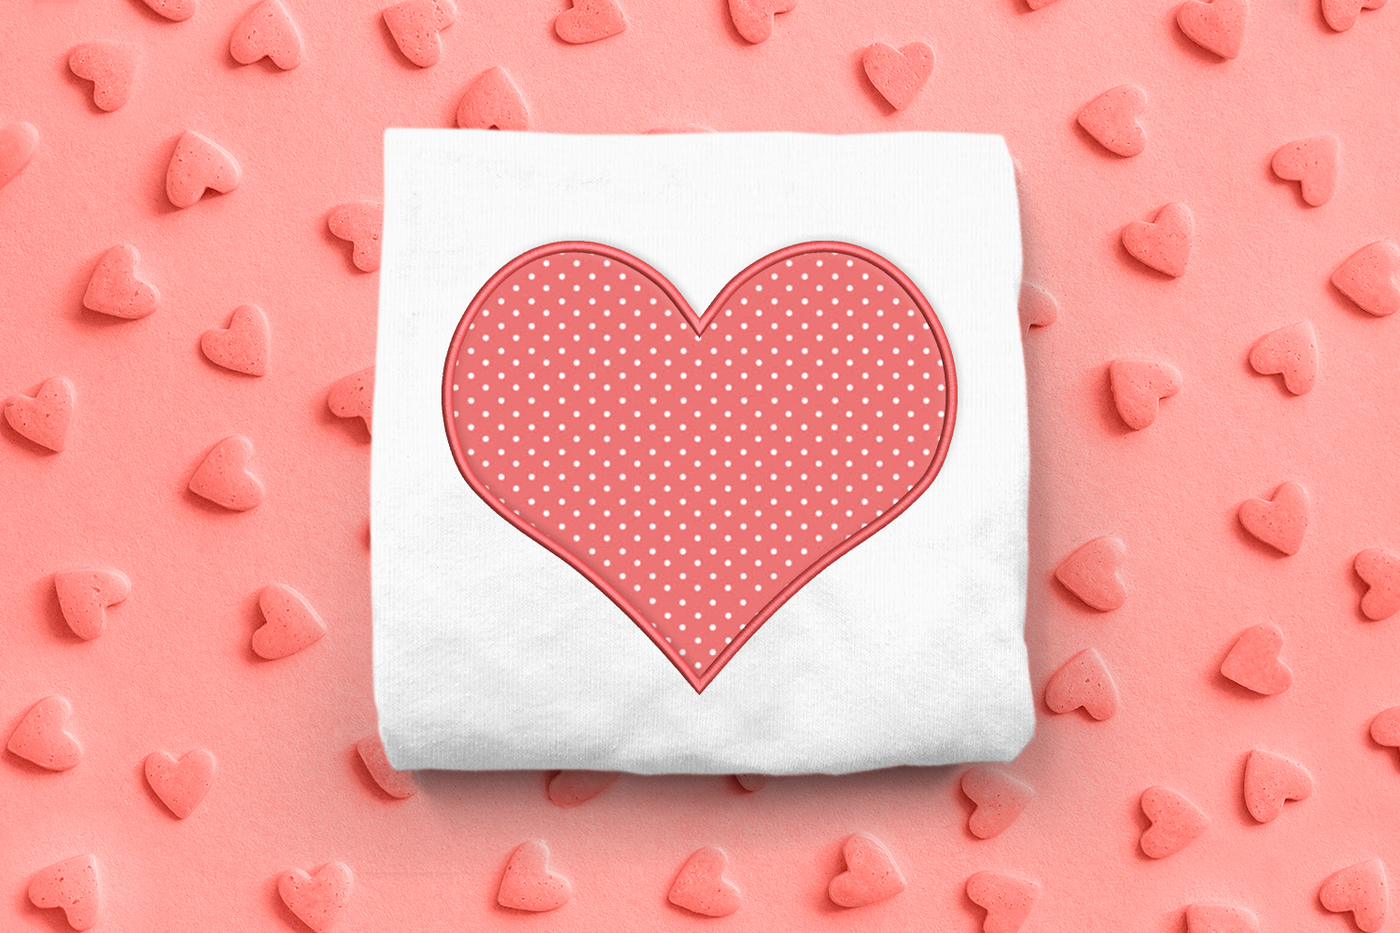 Basic heart applique embroidery